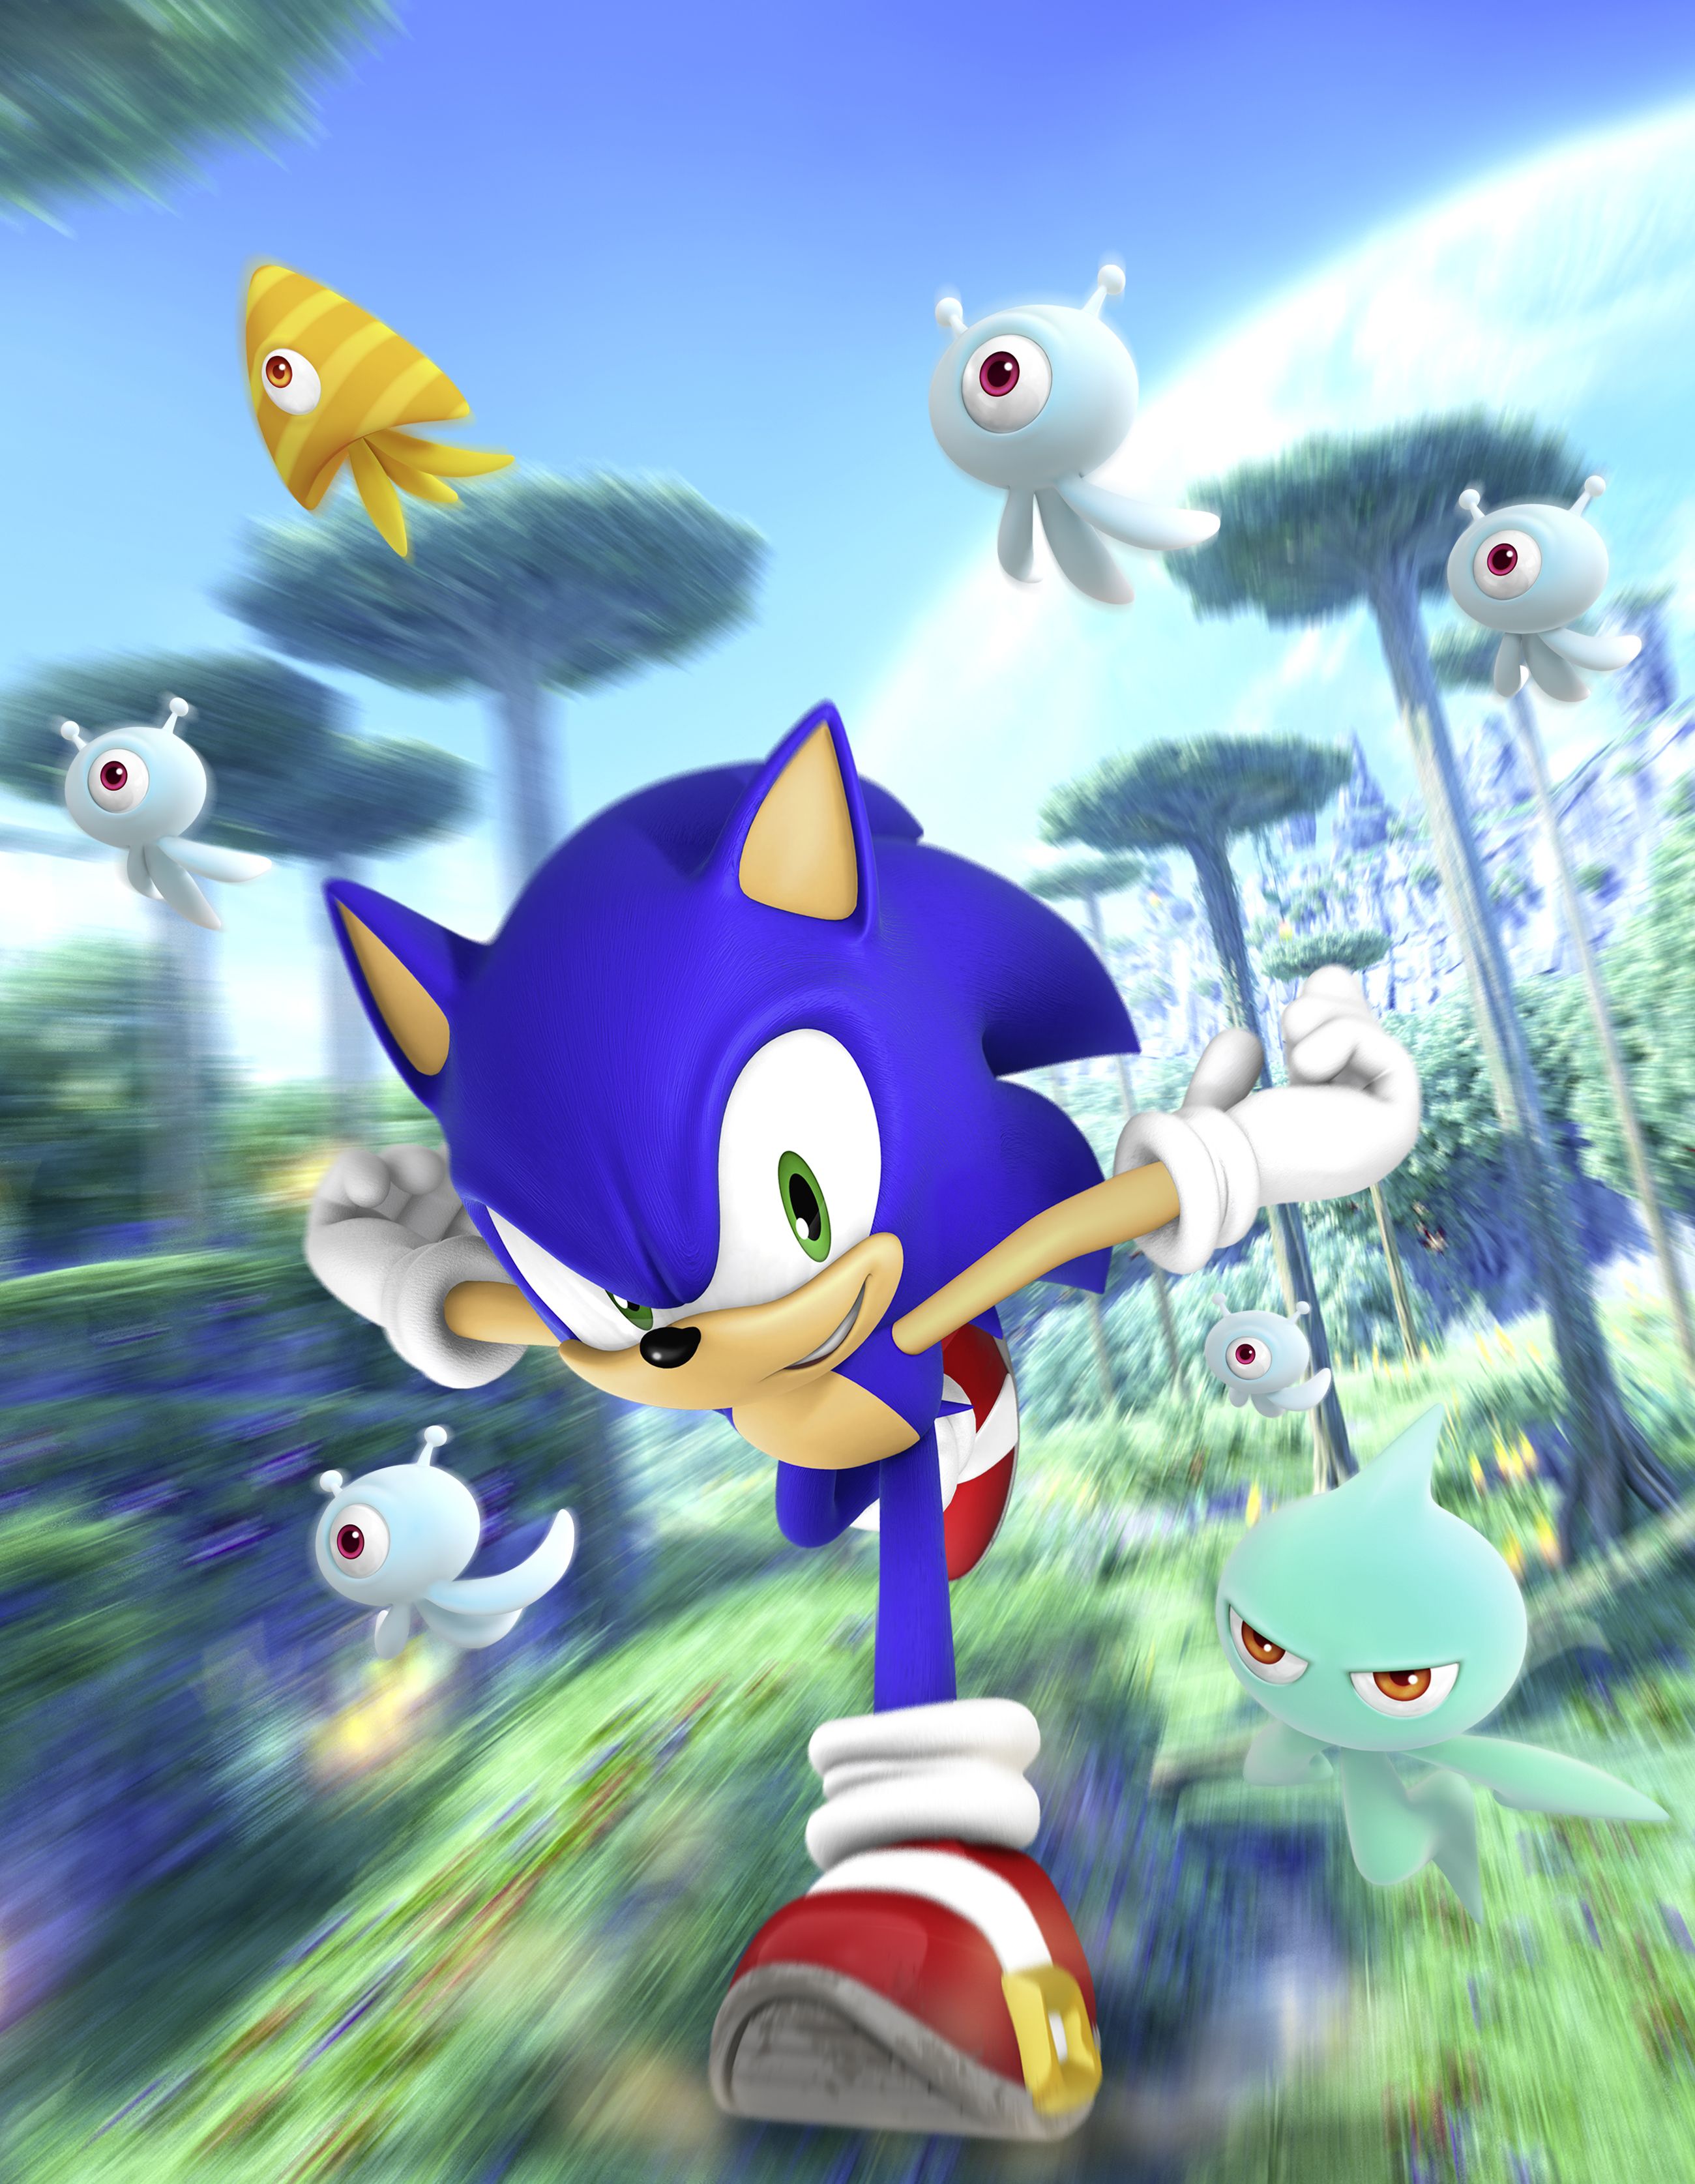 Sonic the Hedgehog HD Wallpapers - Cool Backgrounds